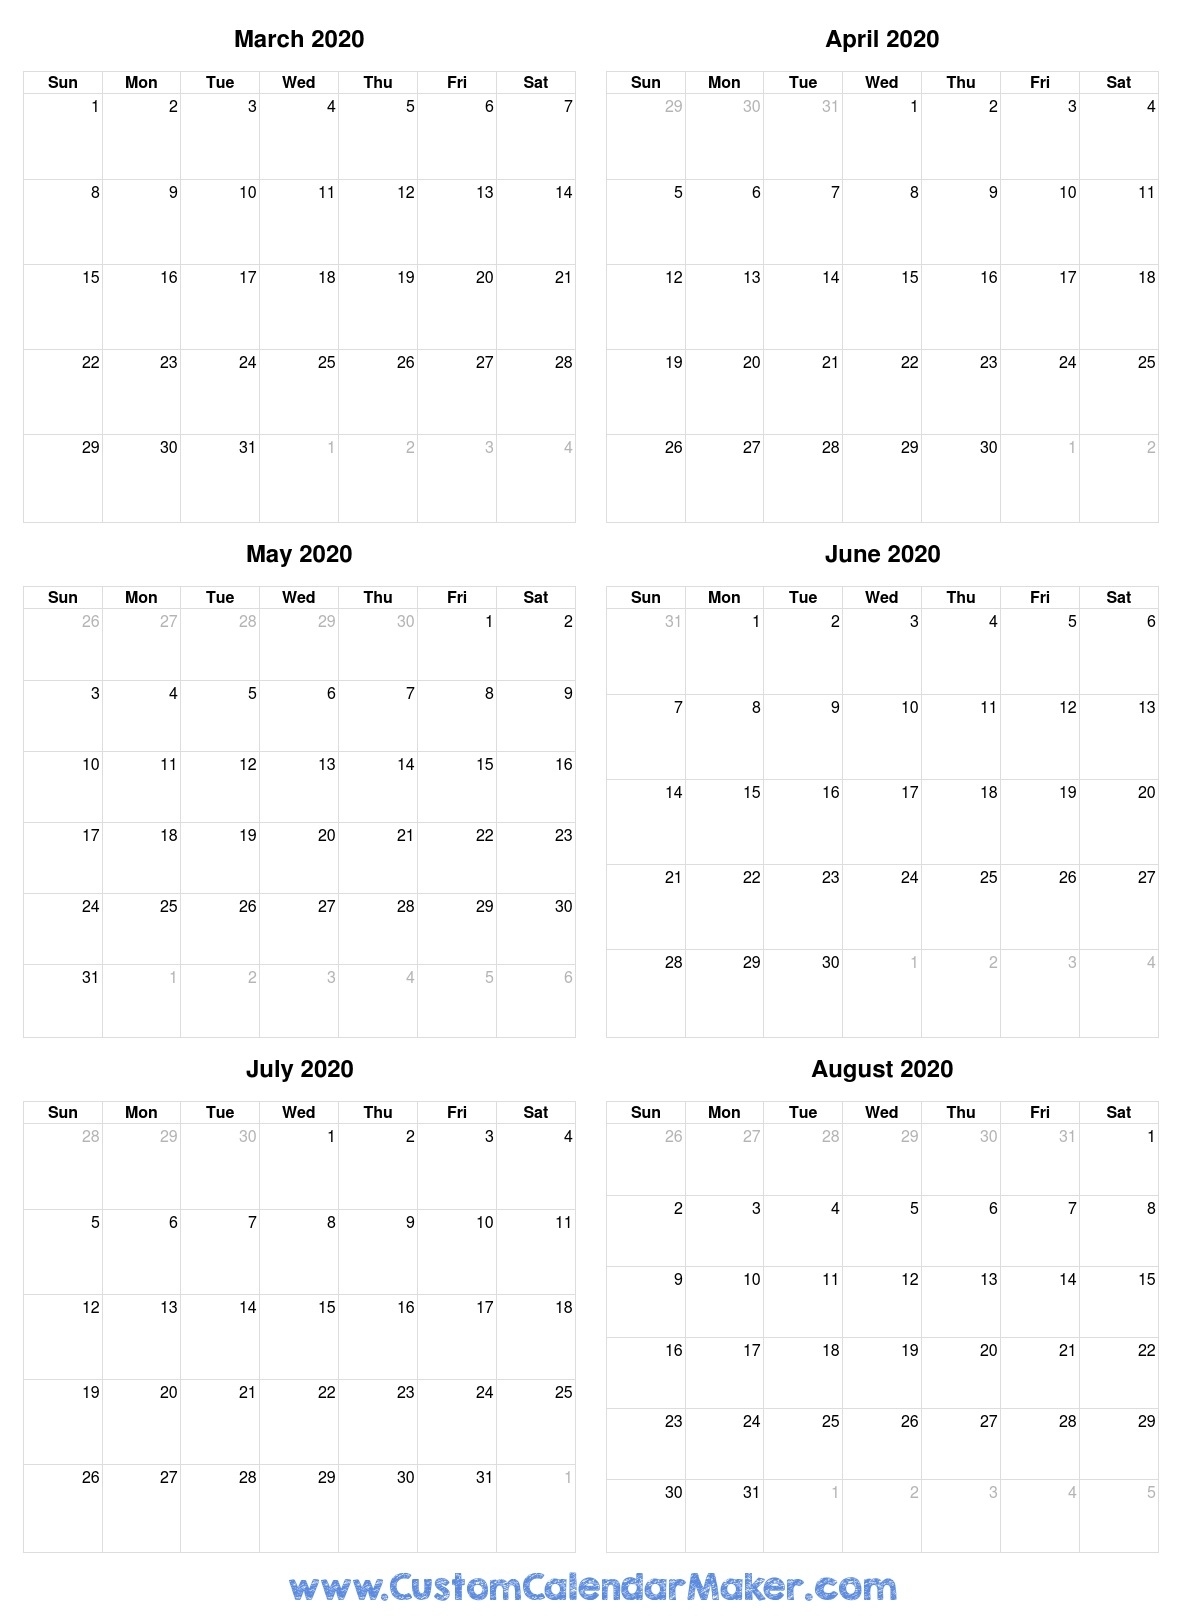 Free Printable Calendars, Blank Pdf Templates To Print A Calendar With 4 Months Per Page